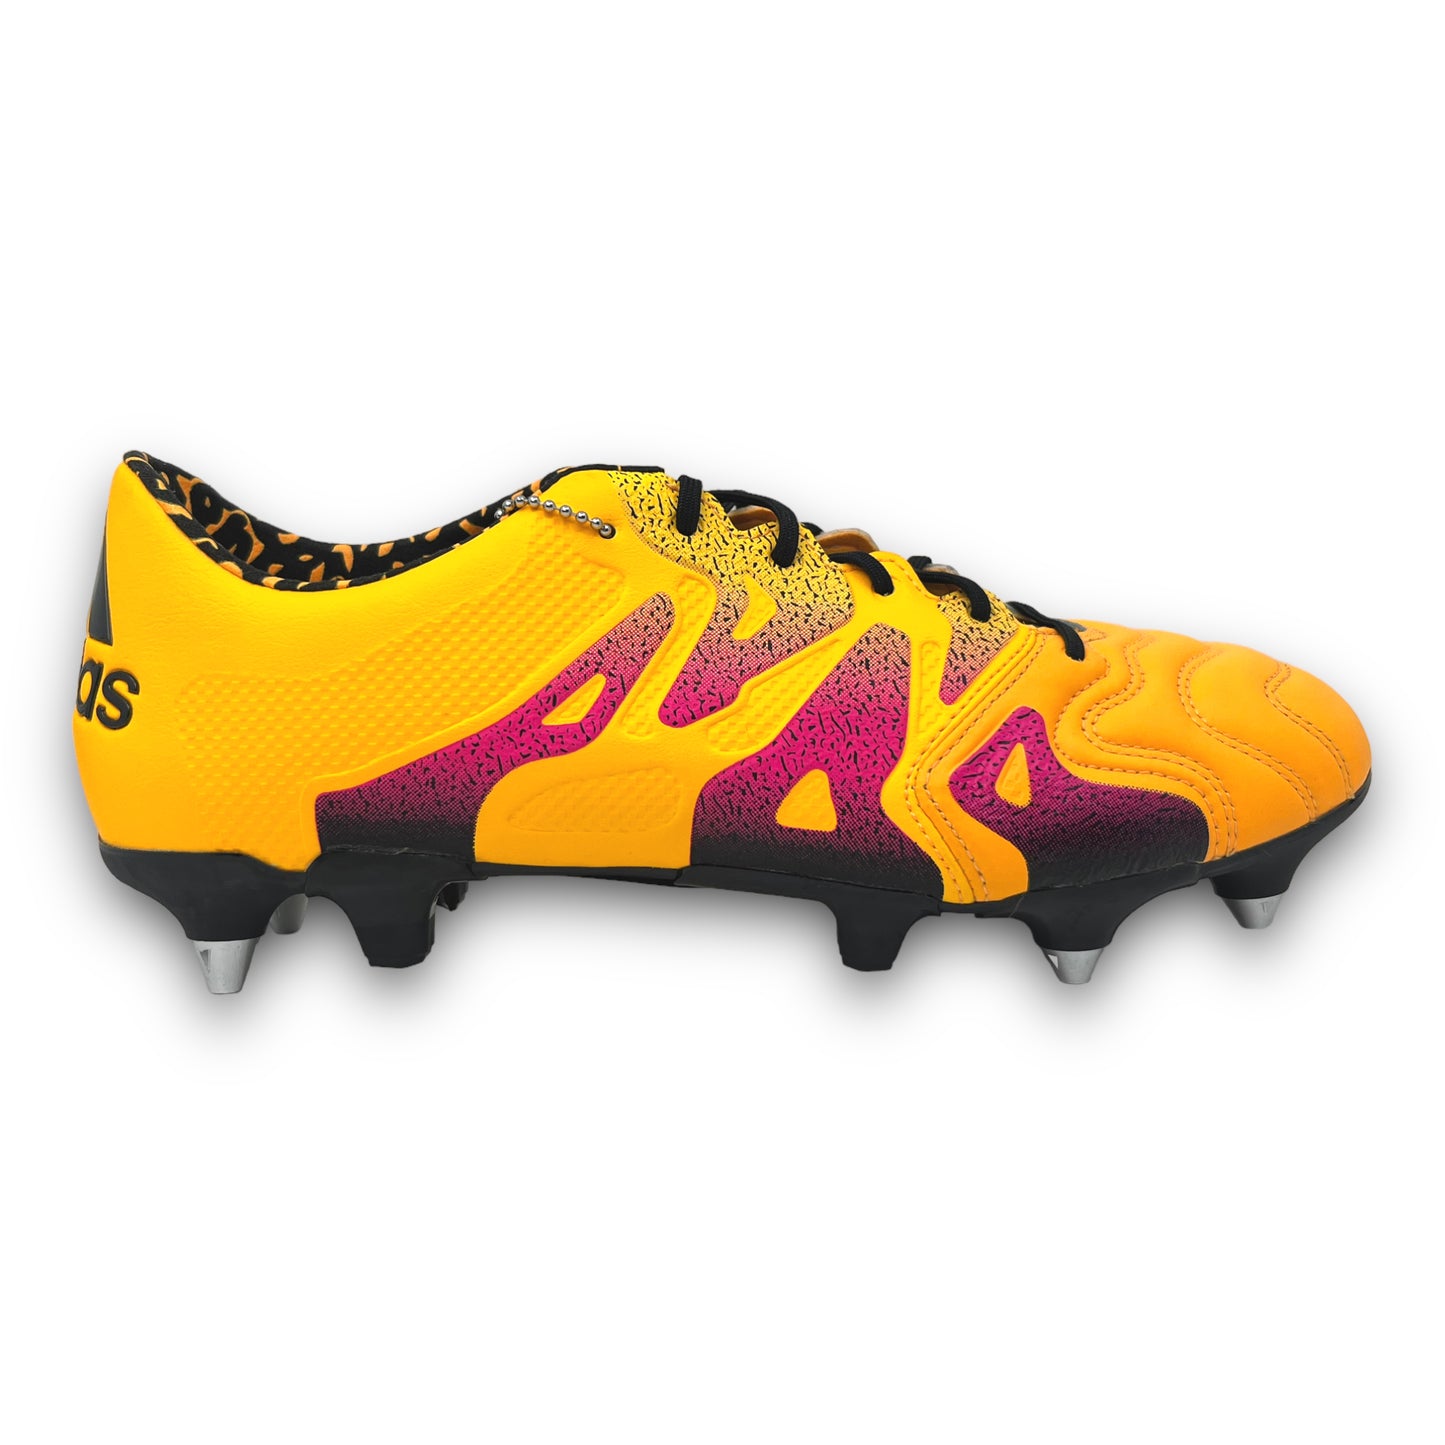 Adidas X 15.1 SG Leather "Solar Gold Pack"